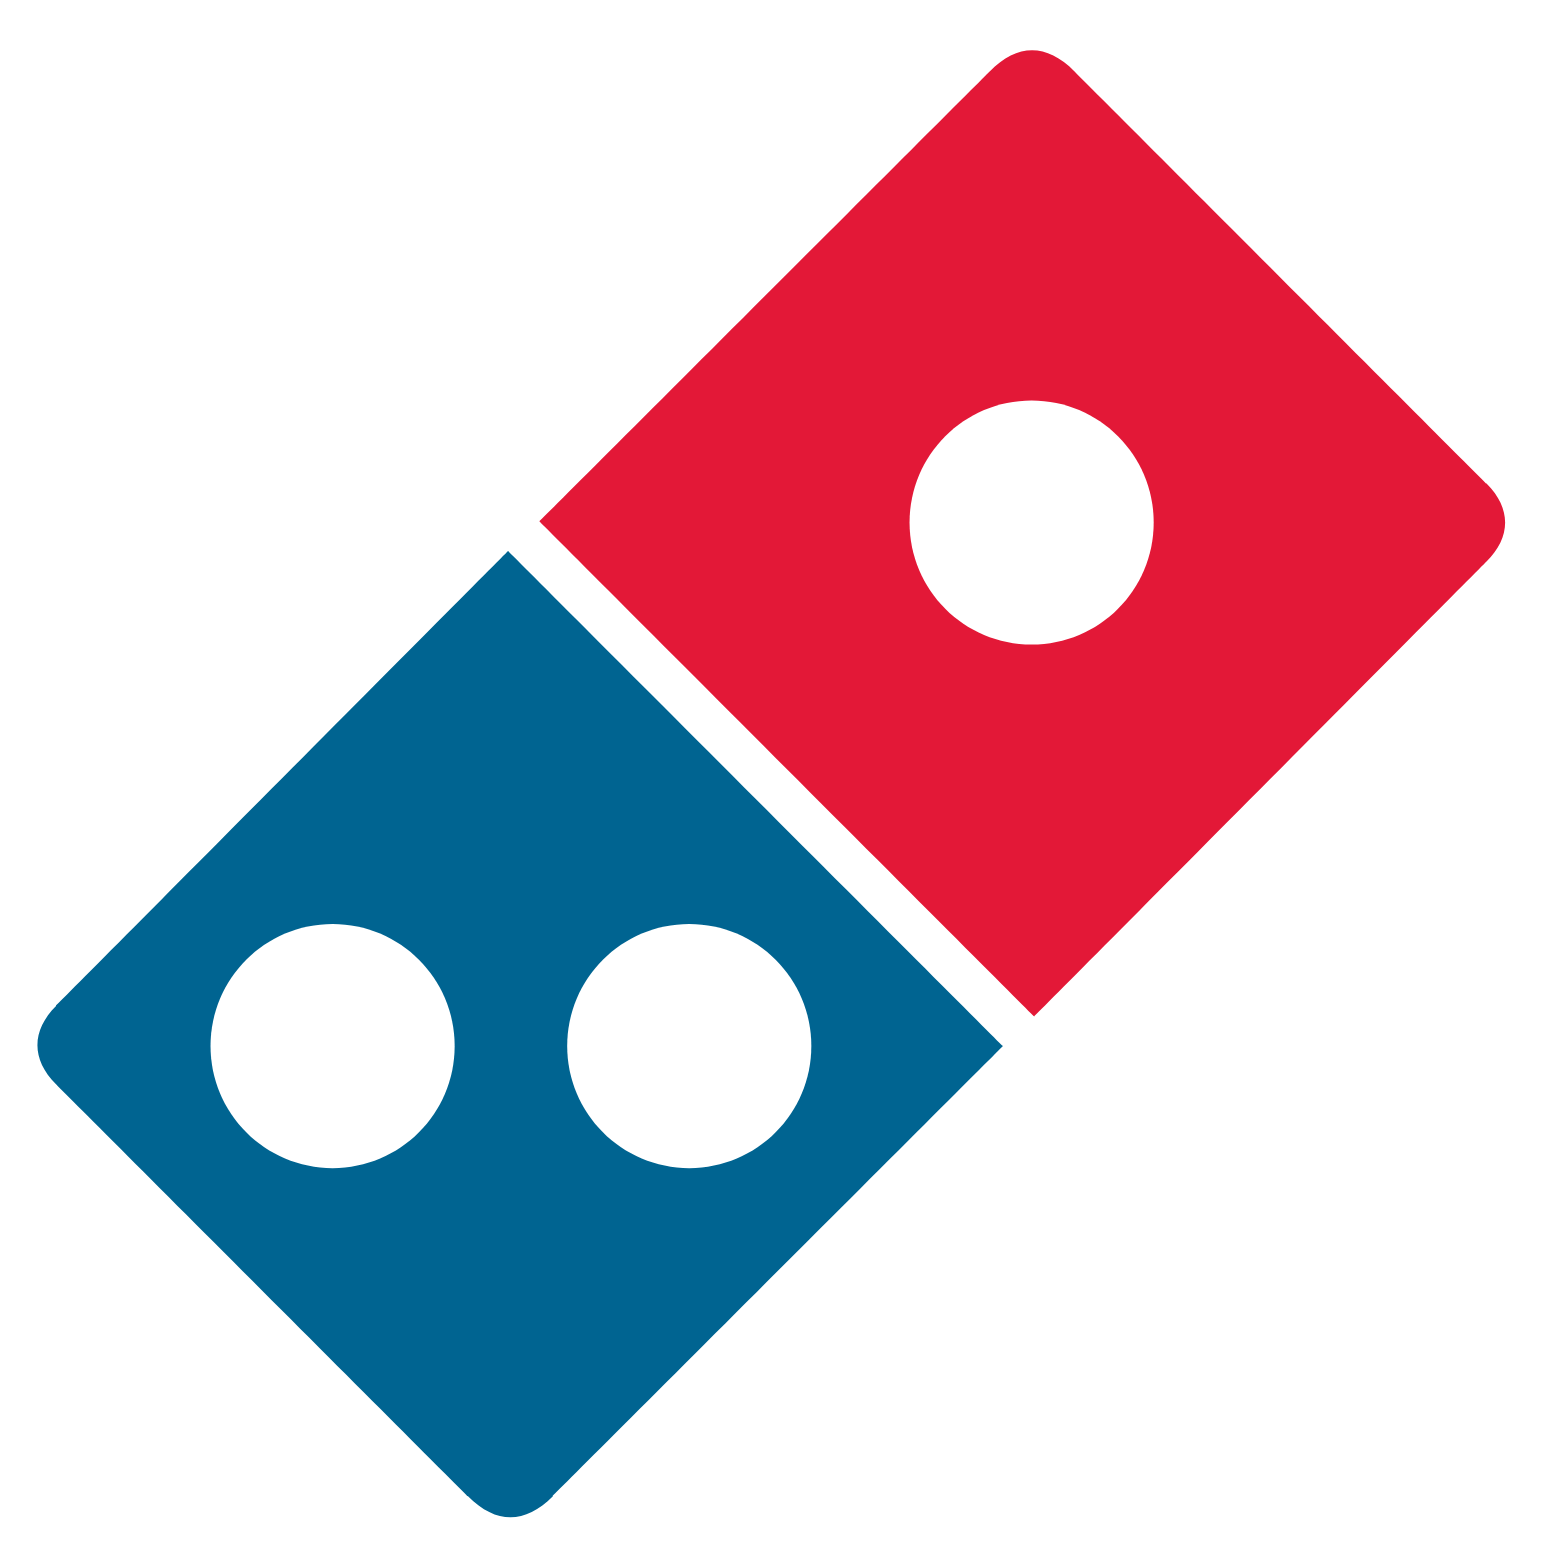 Domino's Pizza logo in transparent PNG and vectorized SVG formats